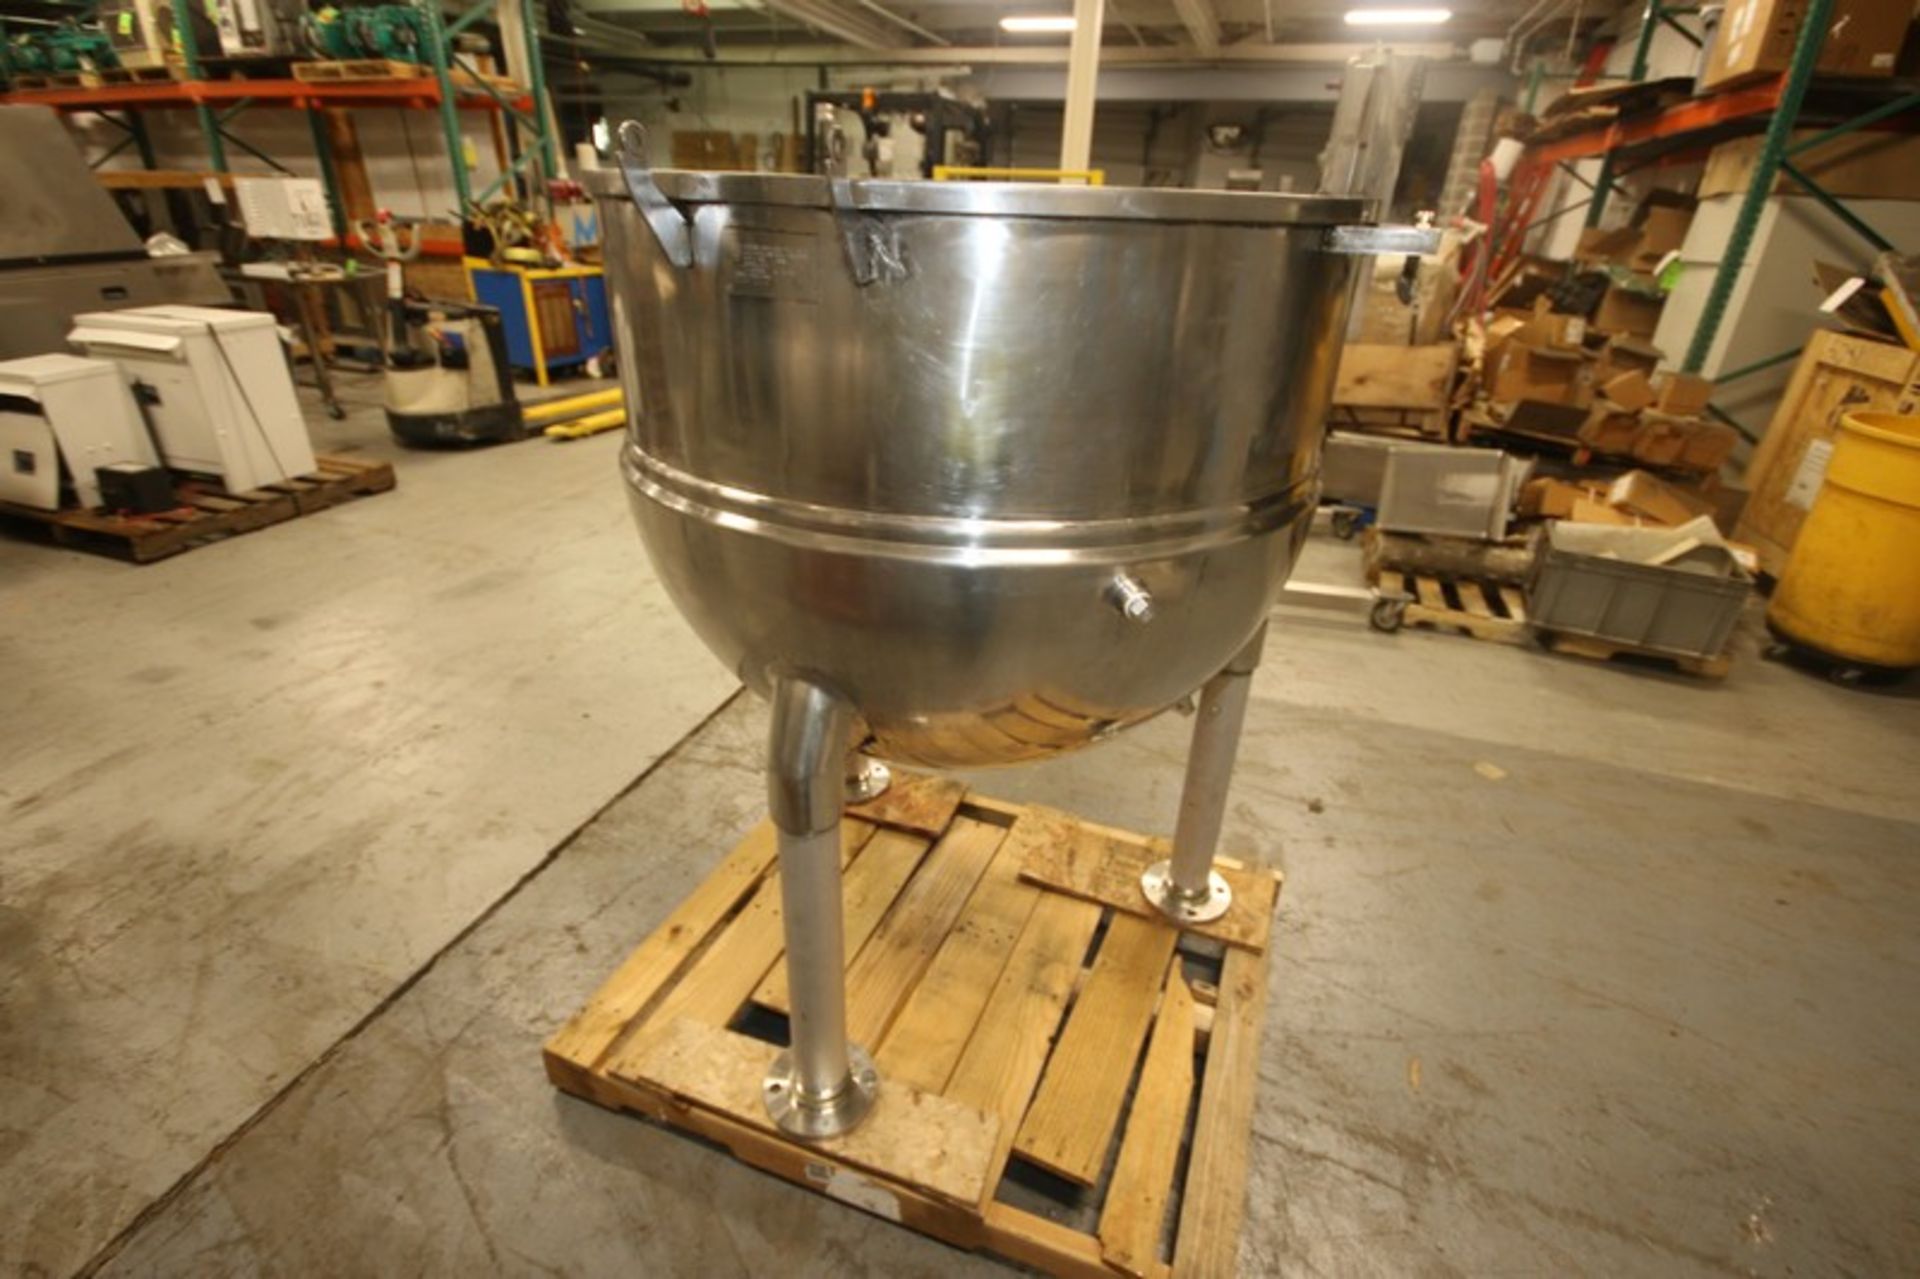 Groen 150 Gal. S/S Kettle,M/N N150SP, MAX. W.P. 100 PSI @ 338 F, Mounted on S/S Legs (INV#80192)( - Image 6 of 7